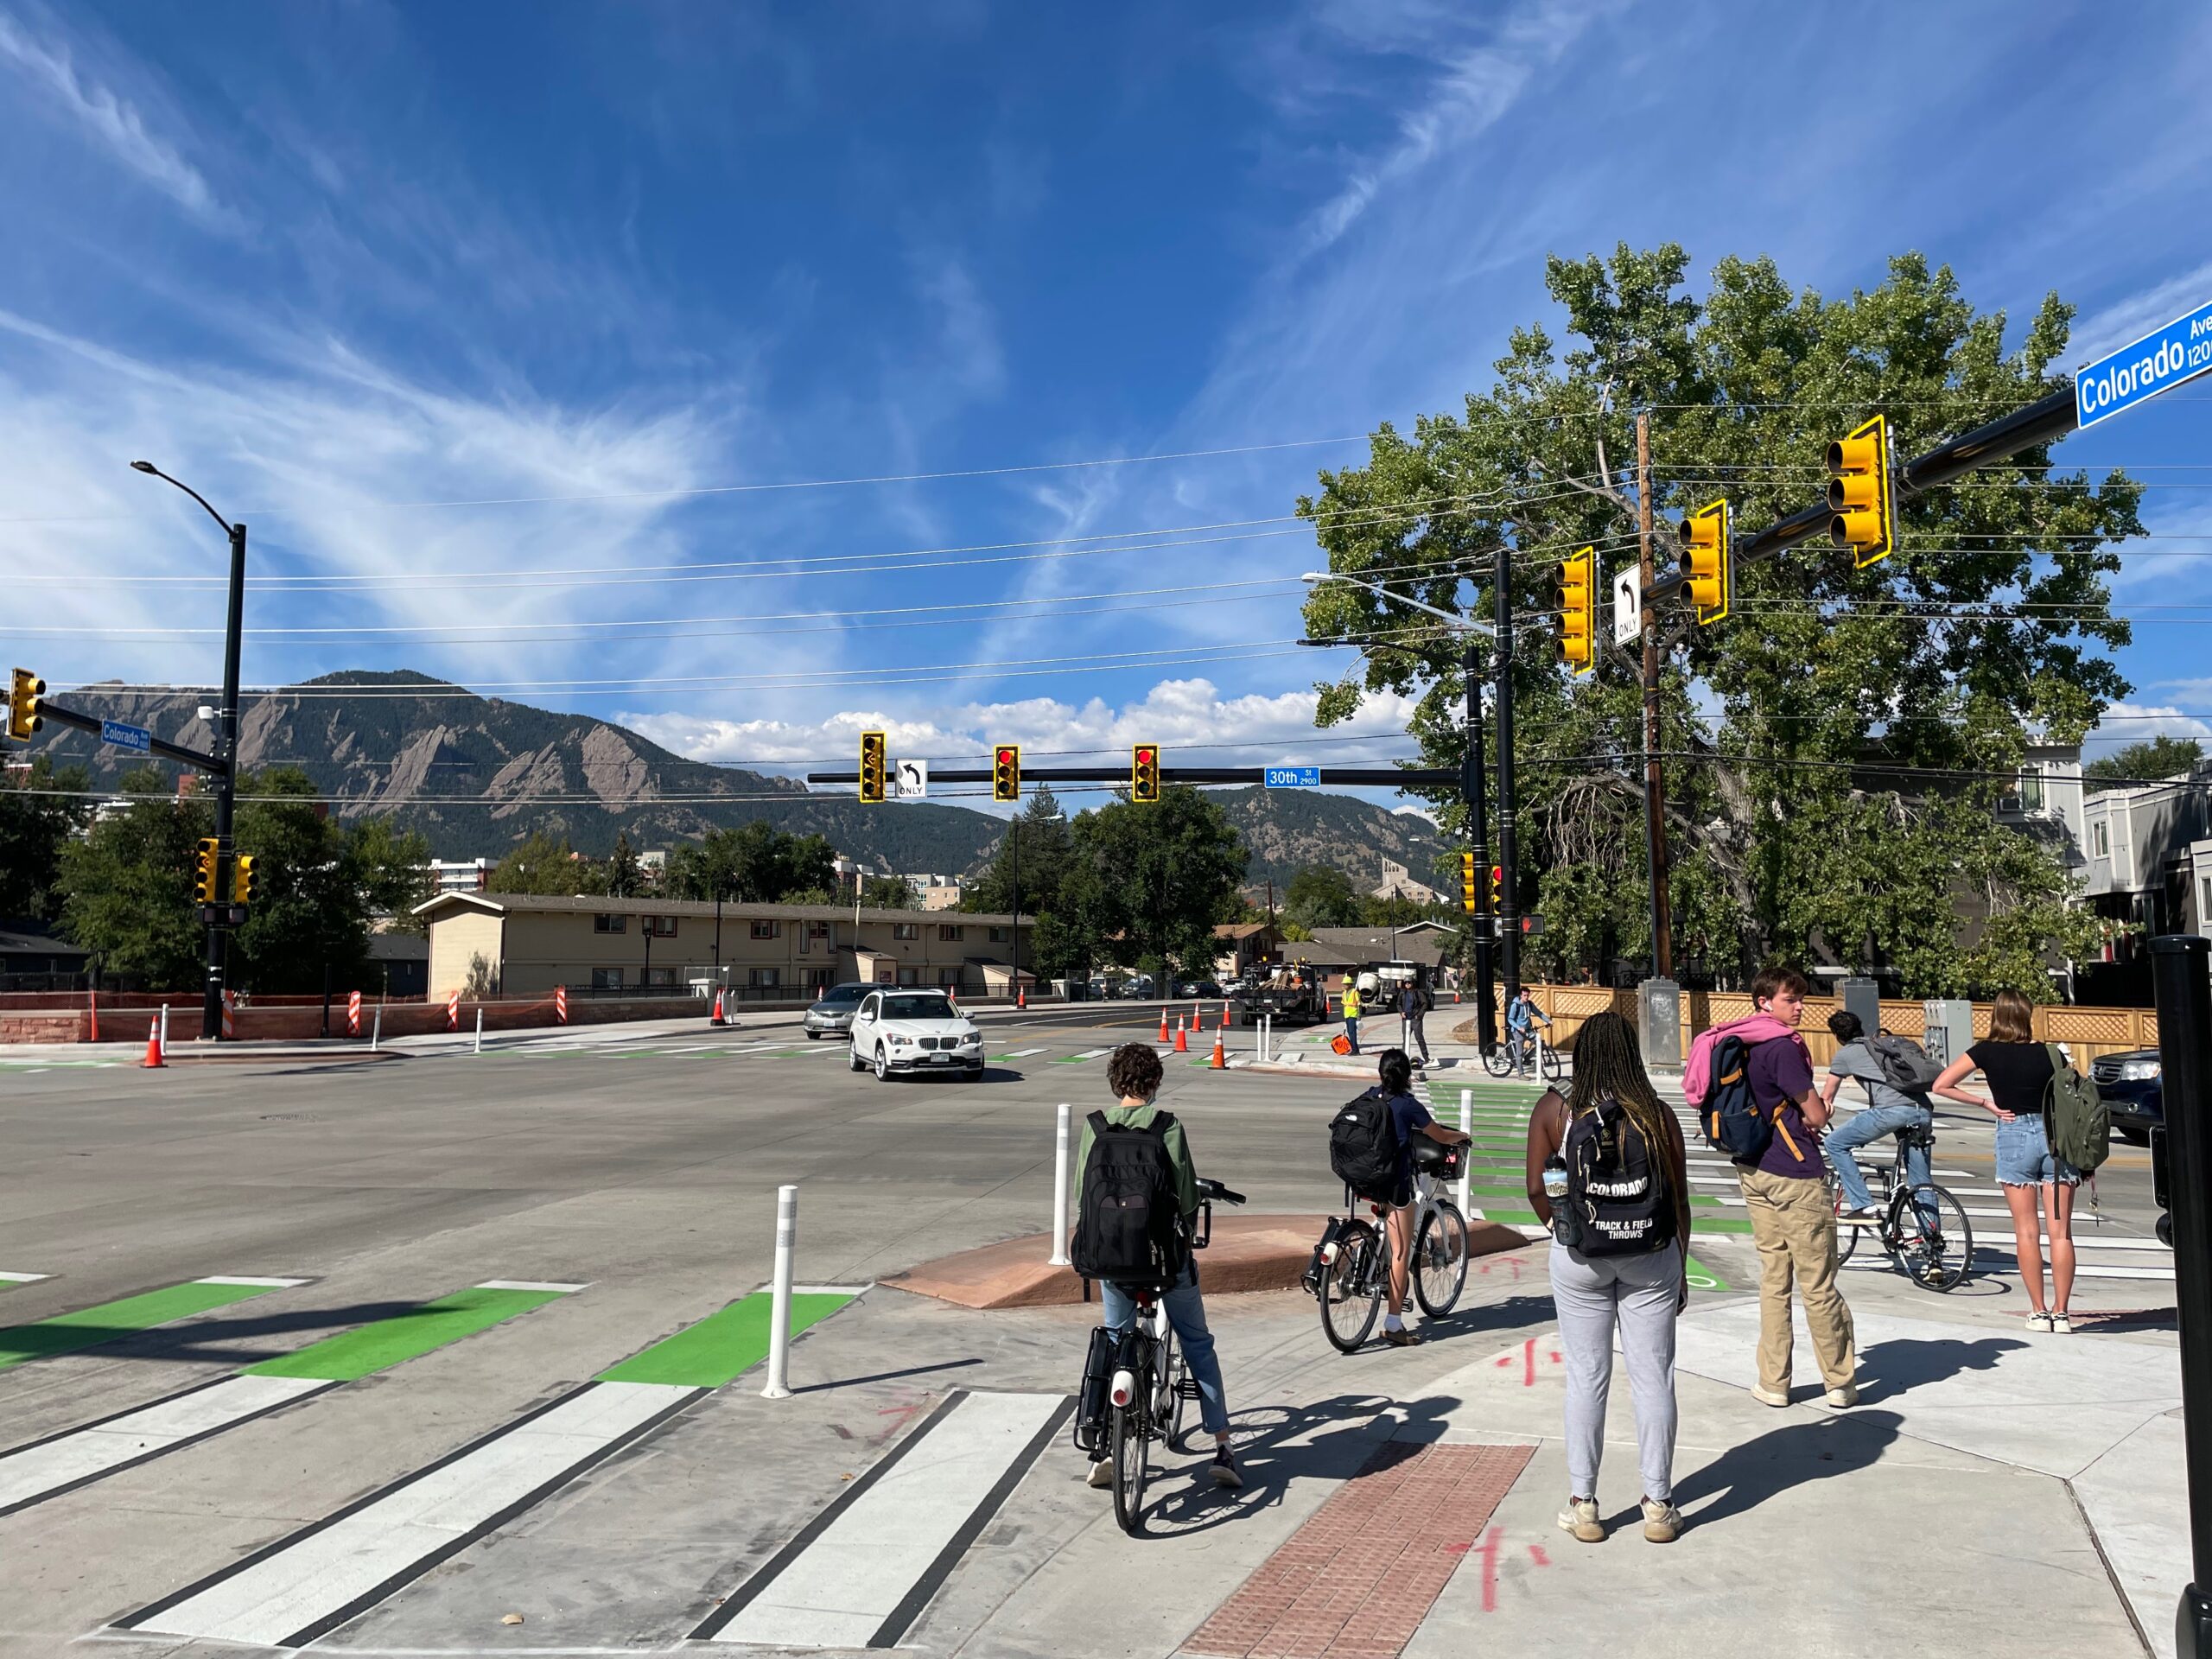 Guest opinion: Boulder’s first fully protected intersection inspires celebration, caution